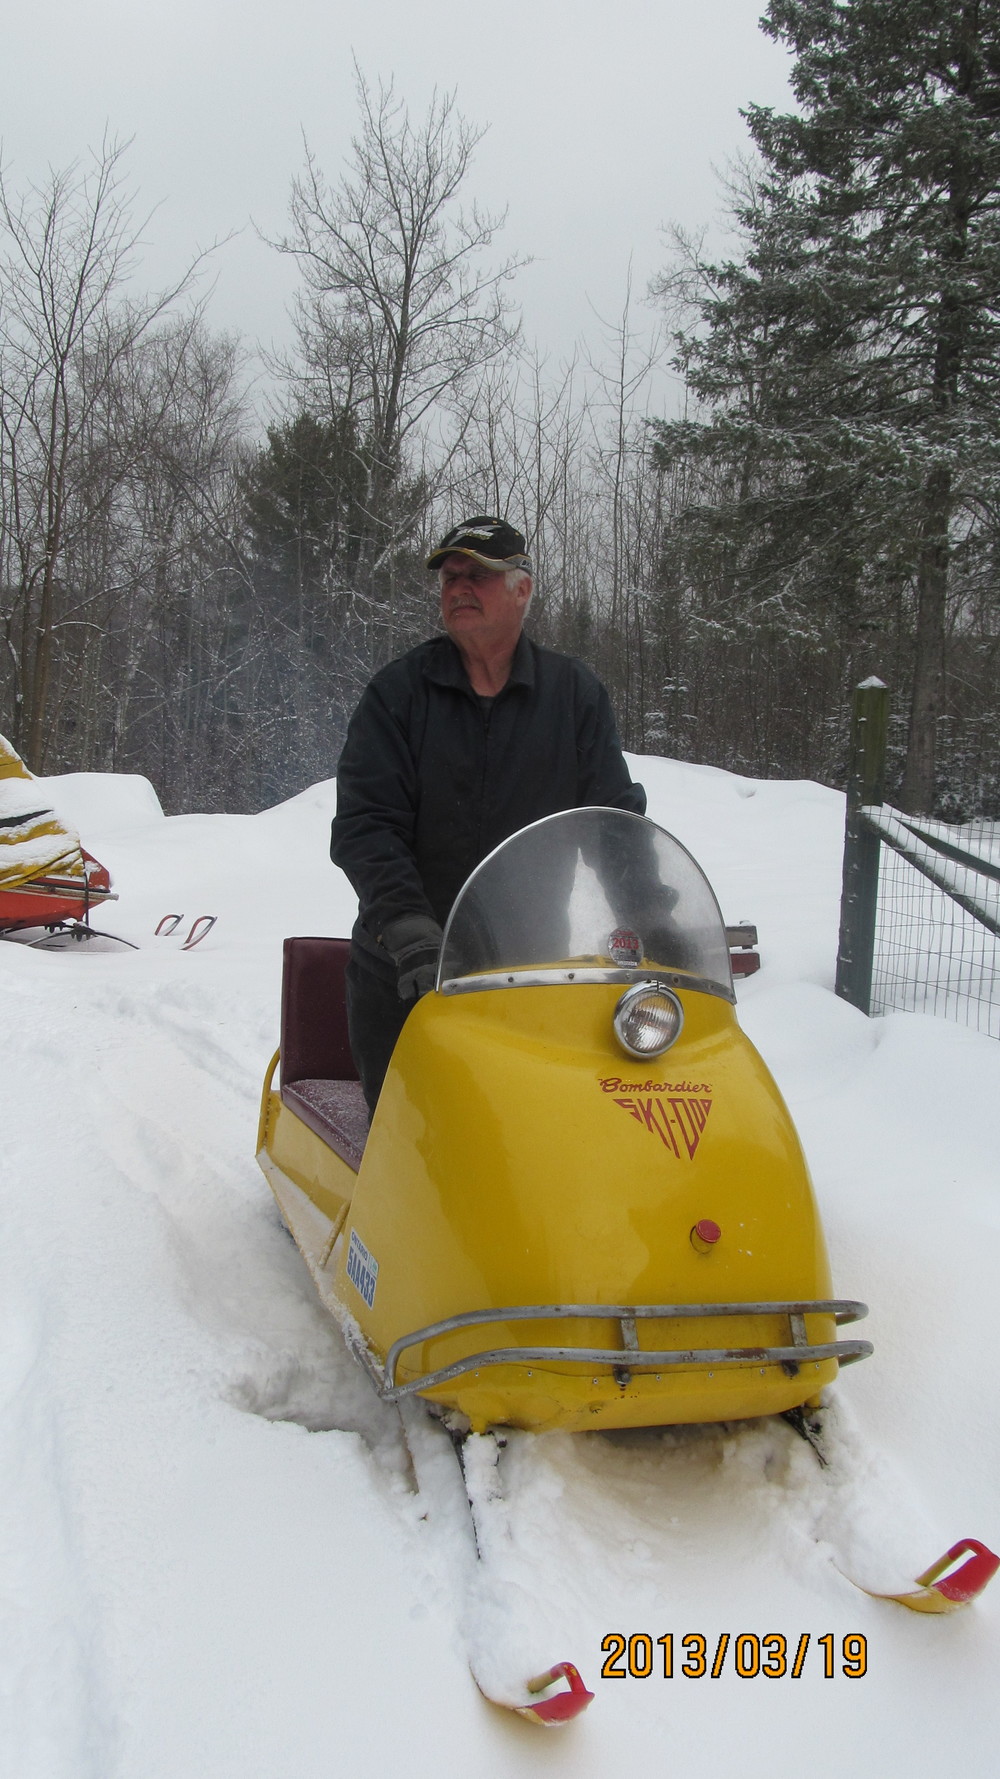 Switzer gets plenty of looks when he rides one of his old sleds into town, and he has participated in a number of community events in the North Hastings region. Photo courtesy Conrad Switzer